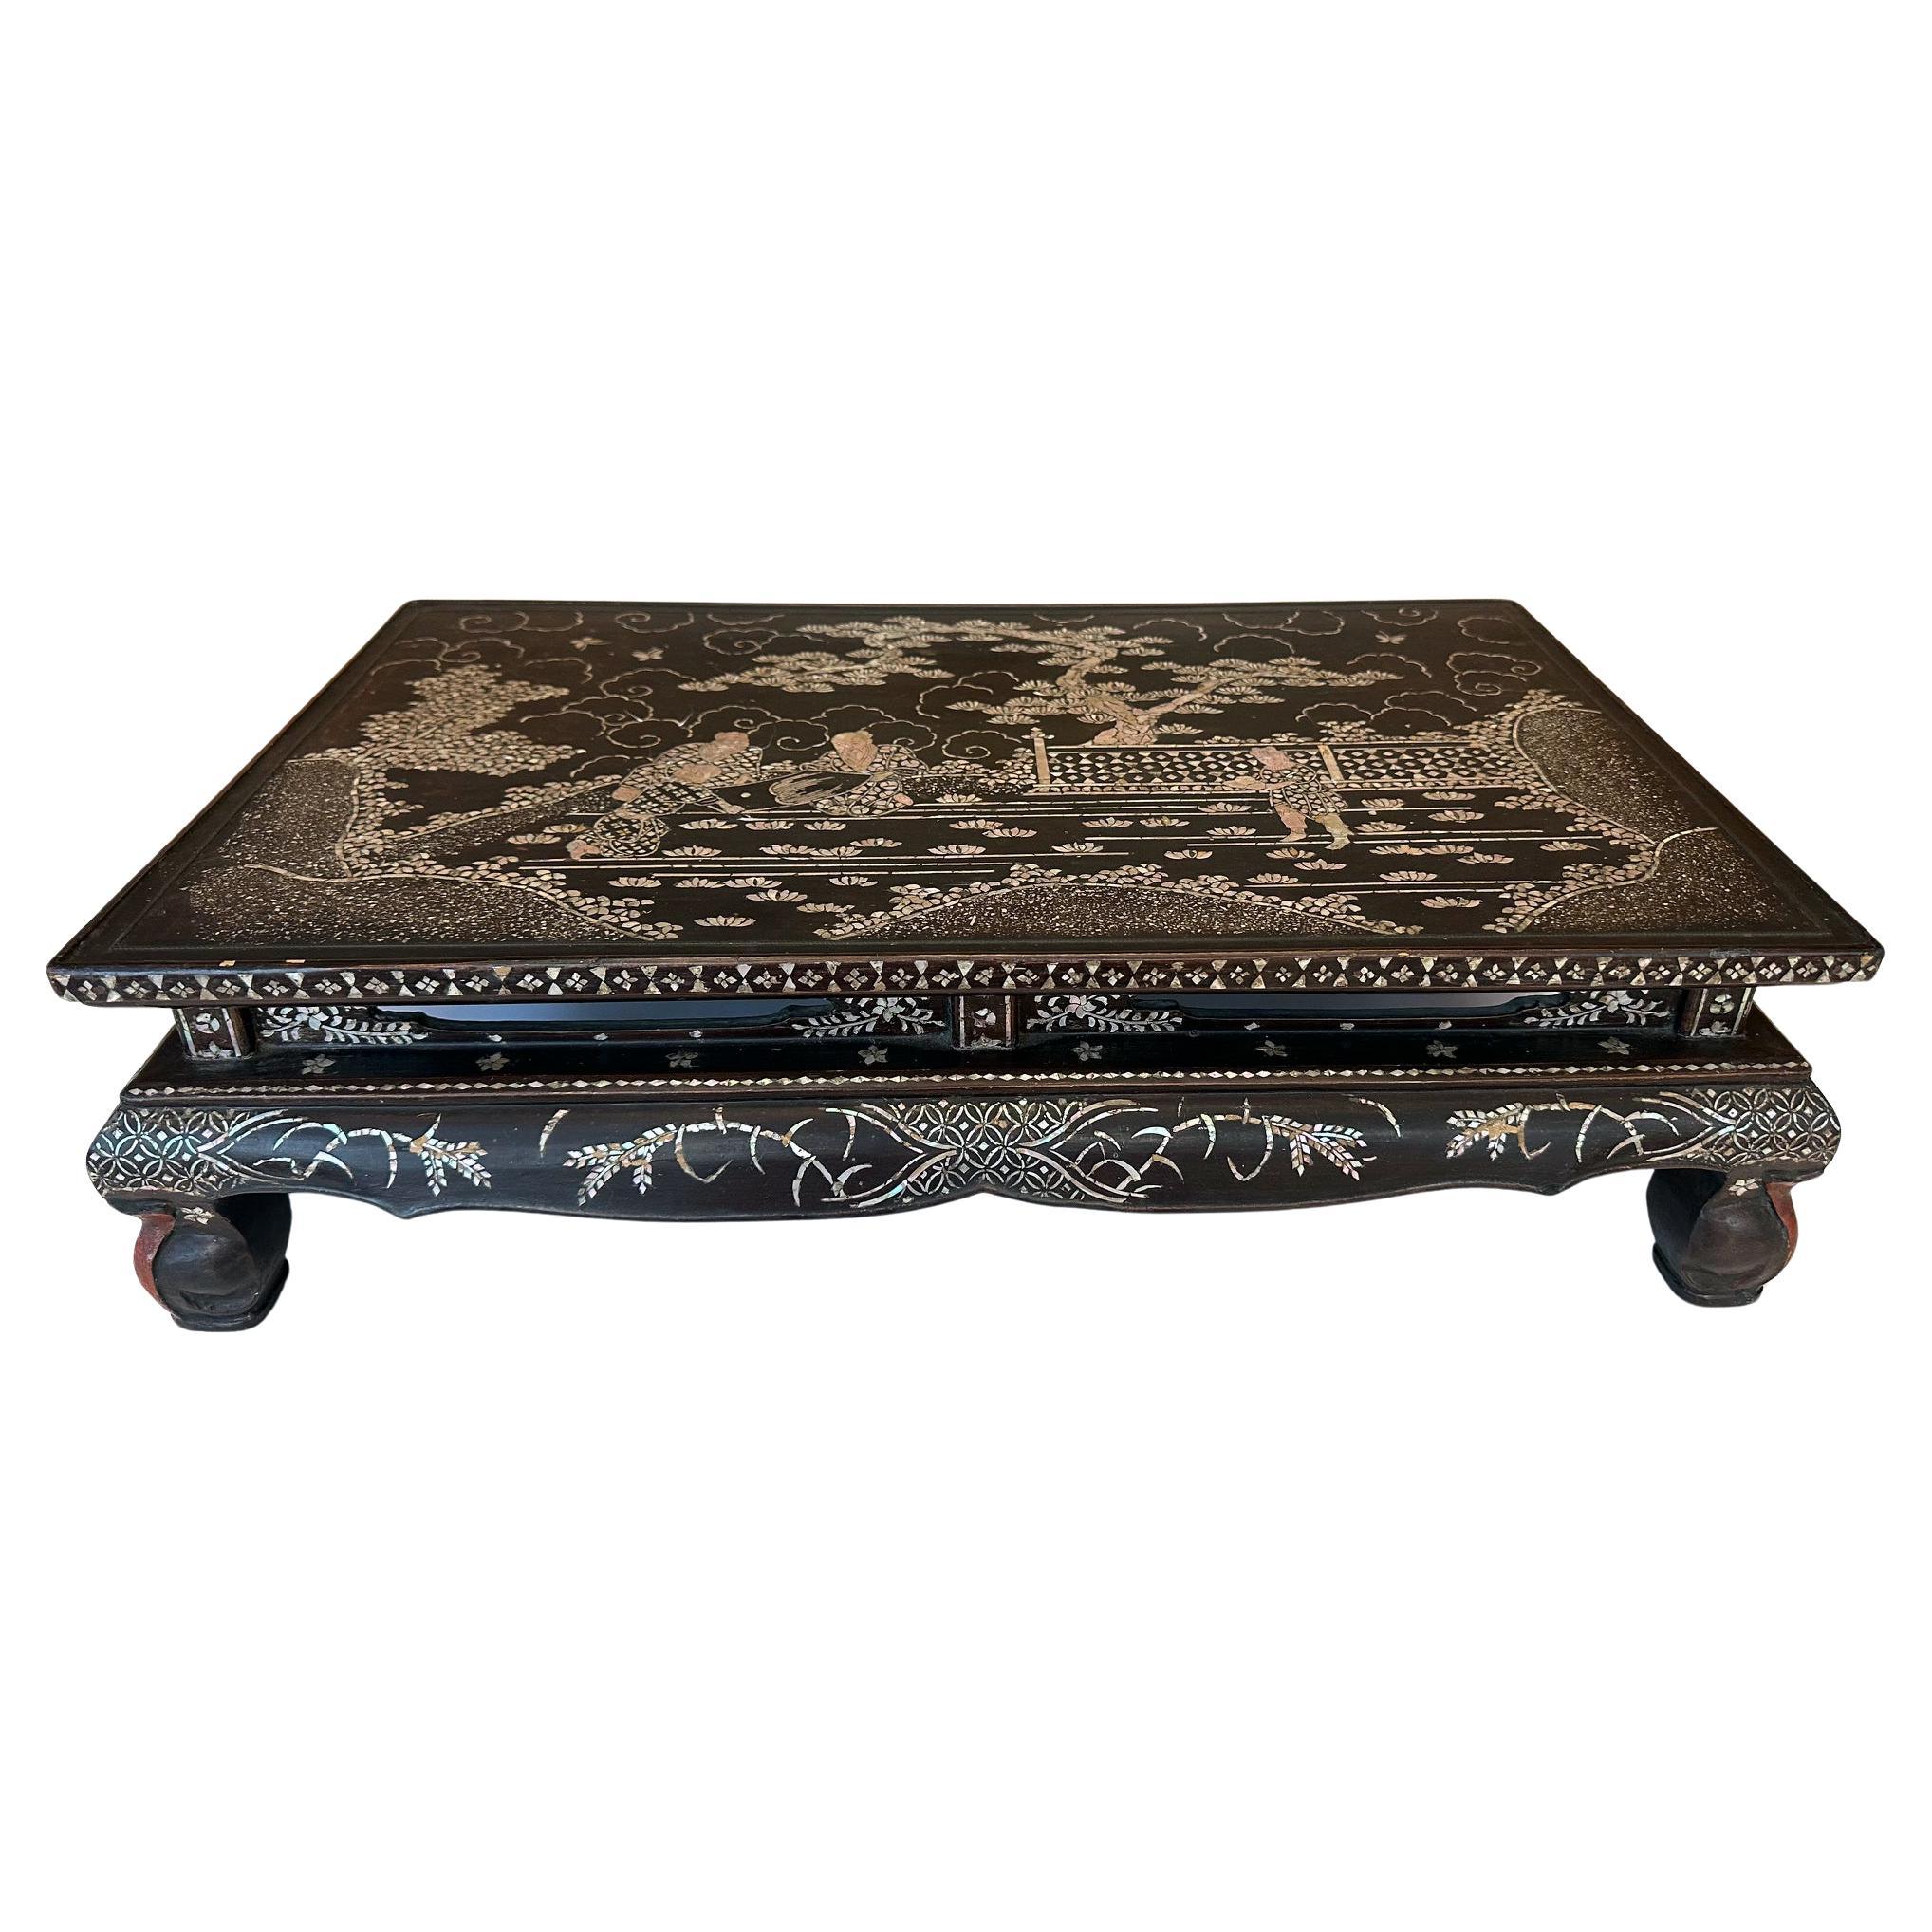 A small low table with lacquer and intricate mother-of-pearl inlay design from Ryukyu Islands kingdom circa 17-18th century. Ryukyuan kingdom was used to be an independent island country until it was officially annexed by Japan in 1879 during Meiji